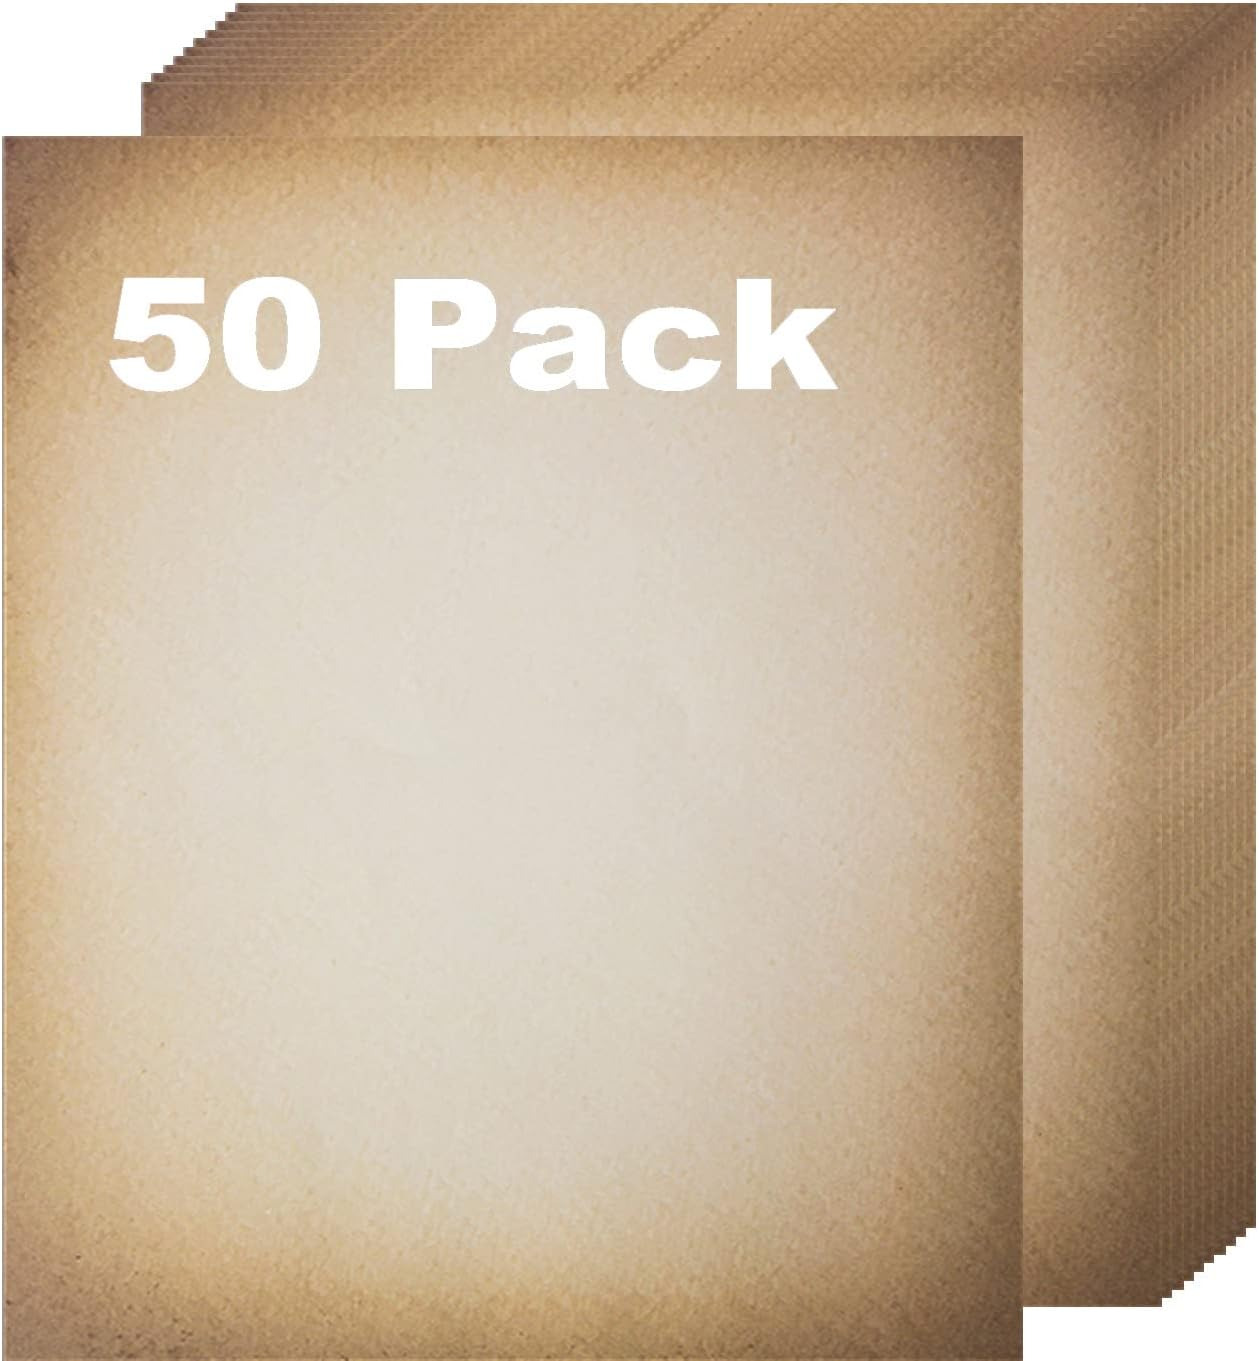 Vintage Aged Paper: 50 Pack | Ideal for Timeless Writing, Drawing, Sketches, Pai